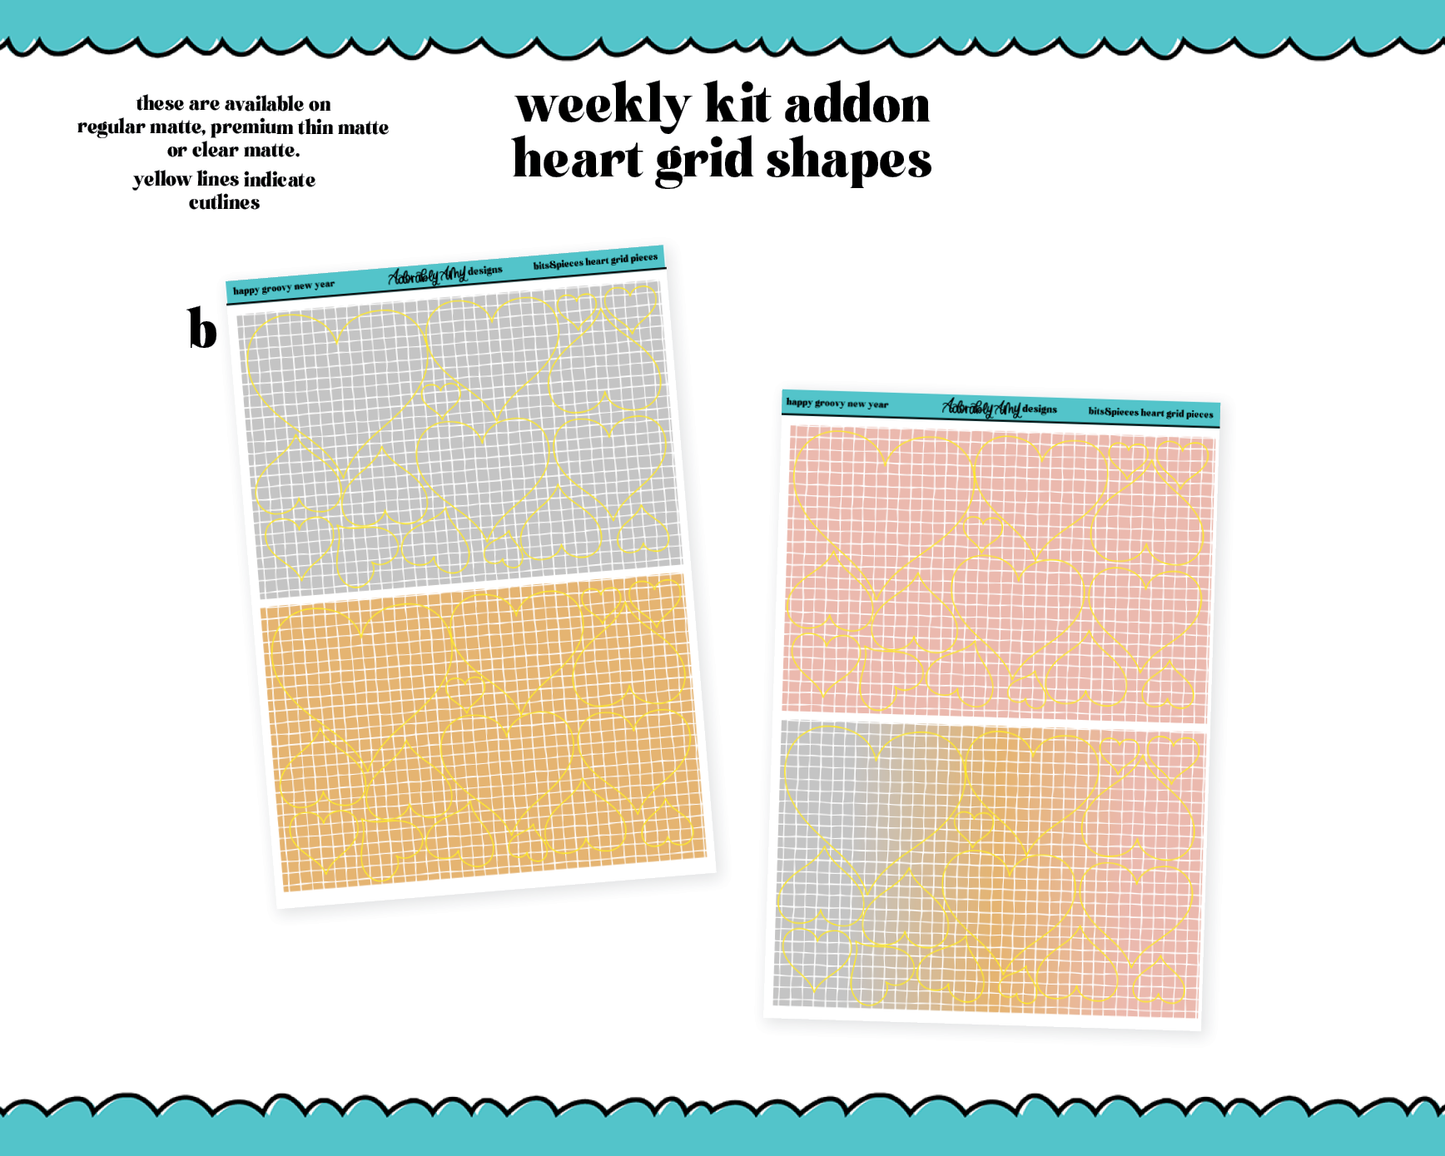 Happy Groovy New Year Weekly Kit Addons - All Sizes - Deco, Smears and More!